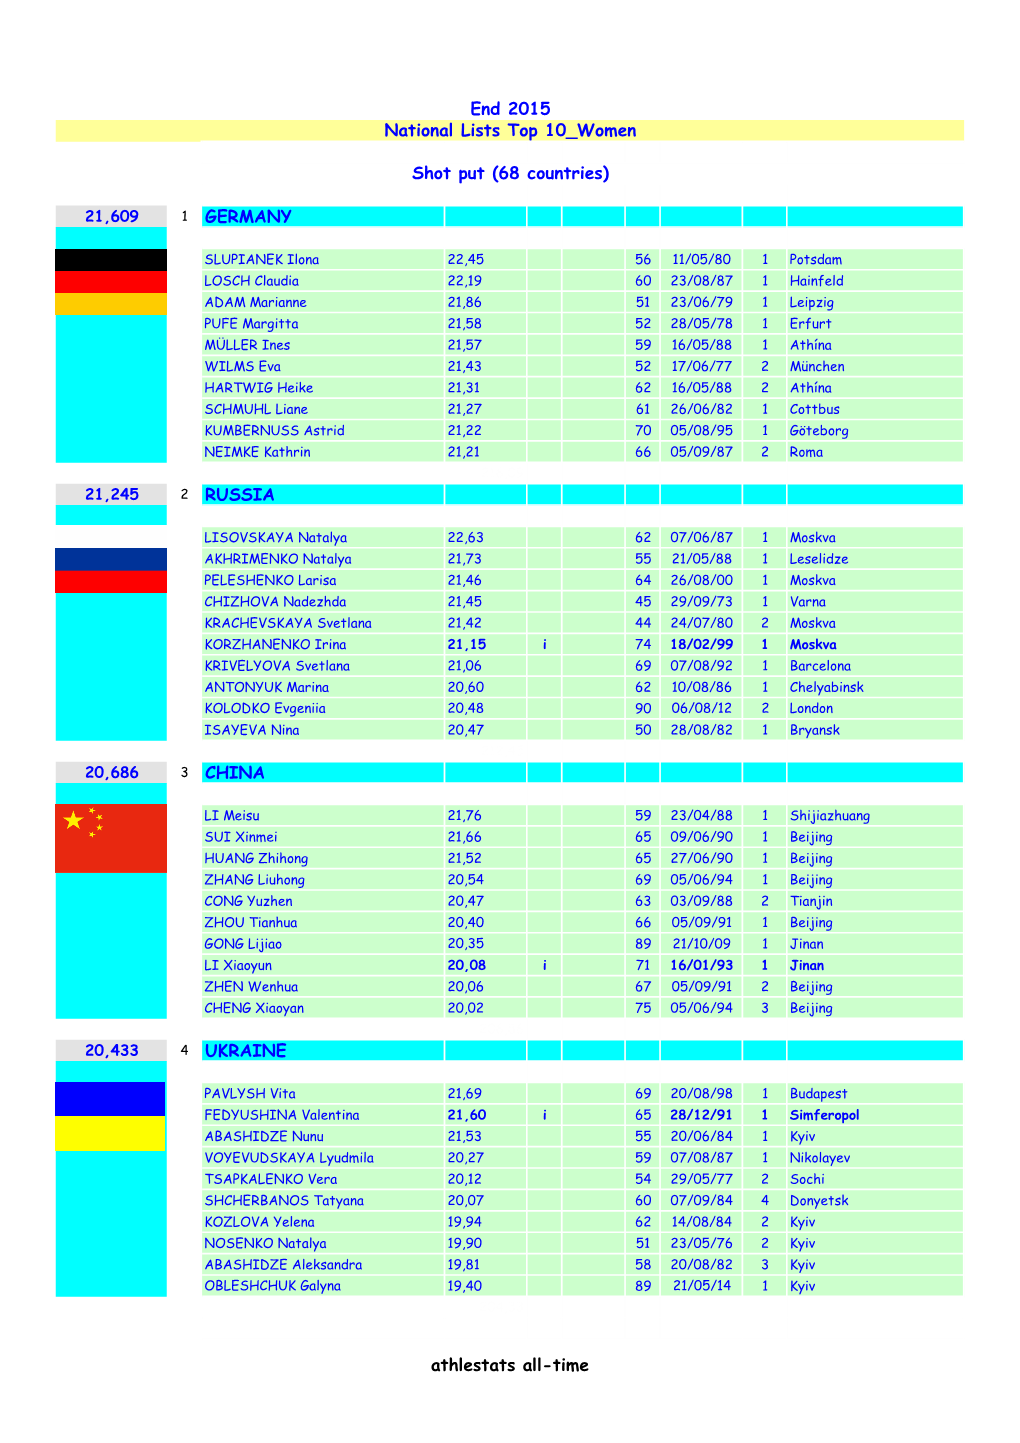 GERMANY RUSSIA CHINA UKRAINE End 2015 National Lists Top 10 Women Shot Put (68 Countries) Athlestats All-Time